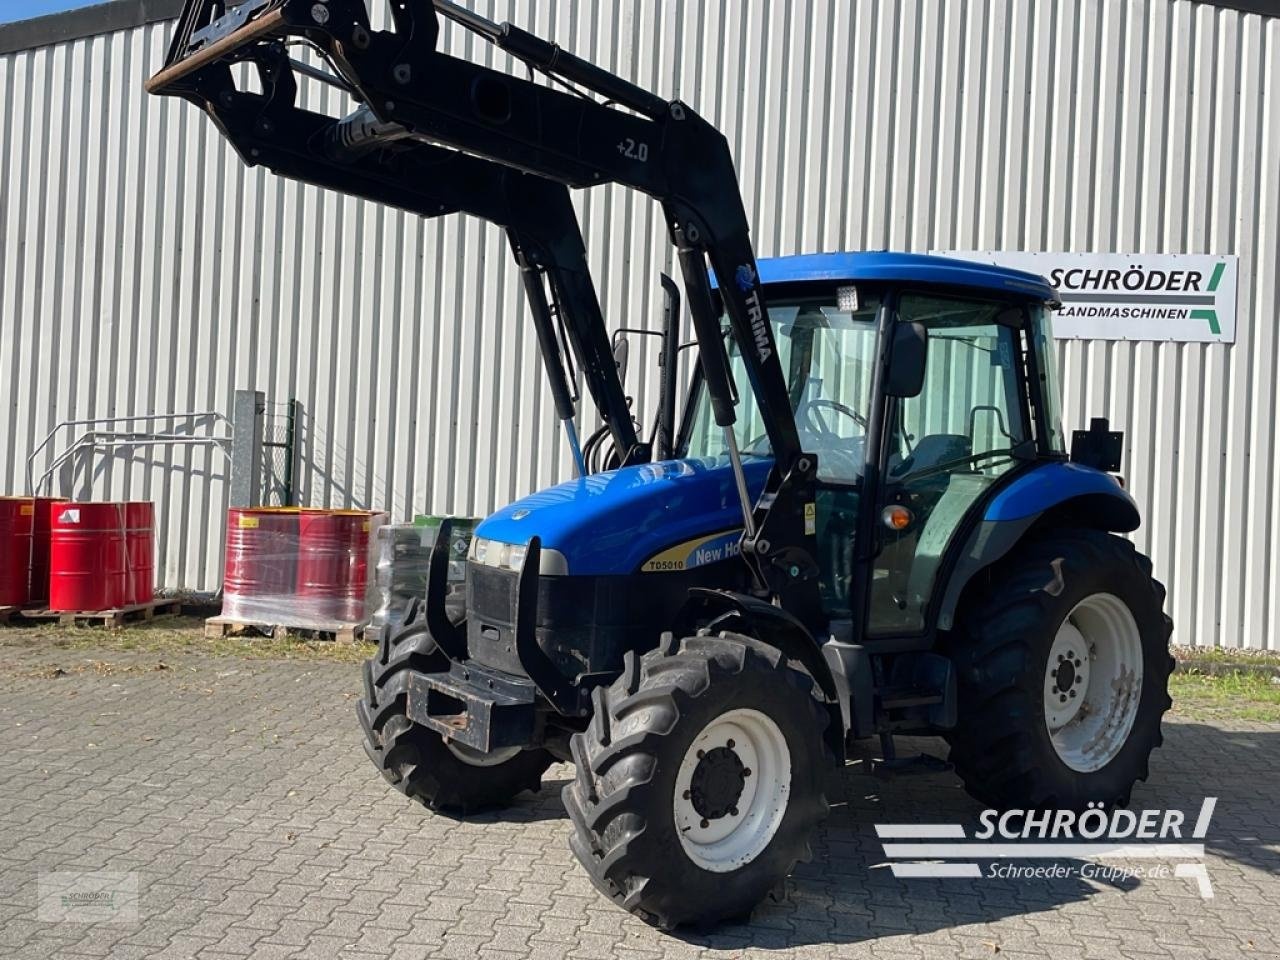 New Holland TD 5010 tractor 27 850 €